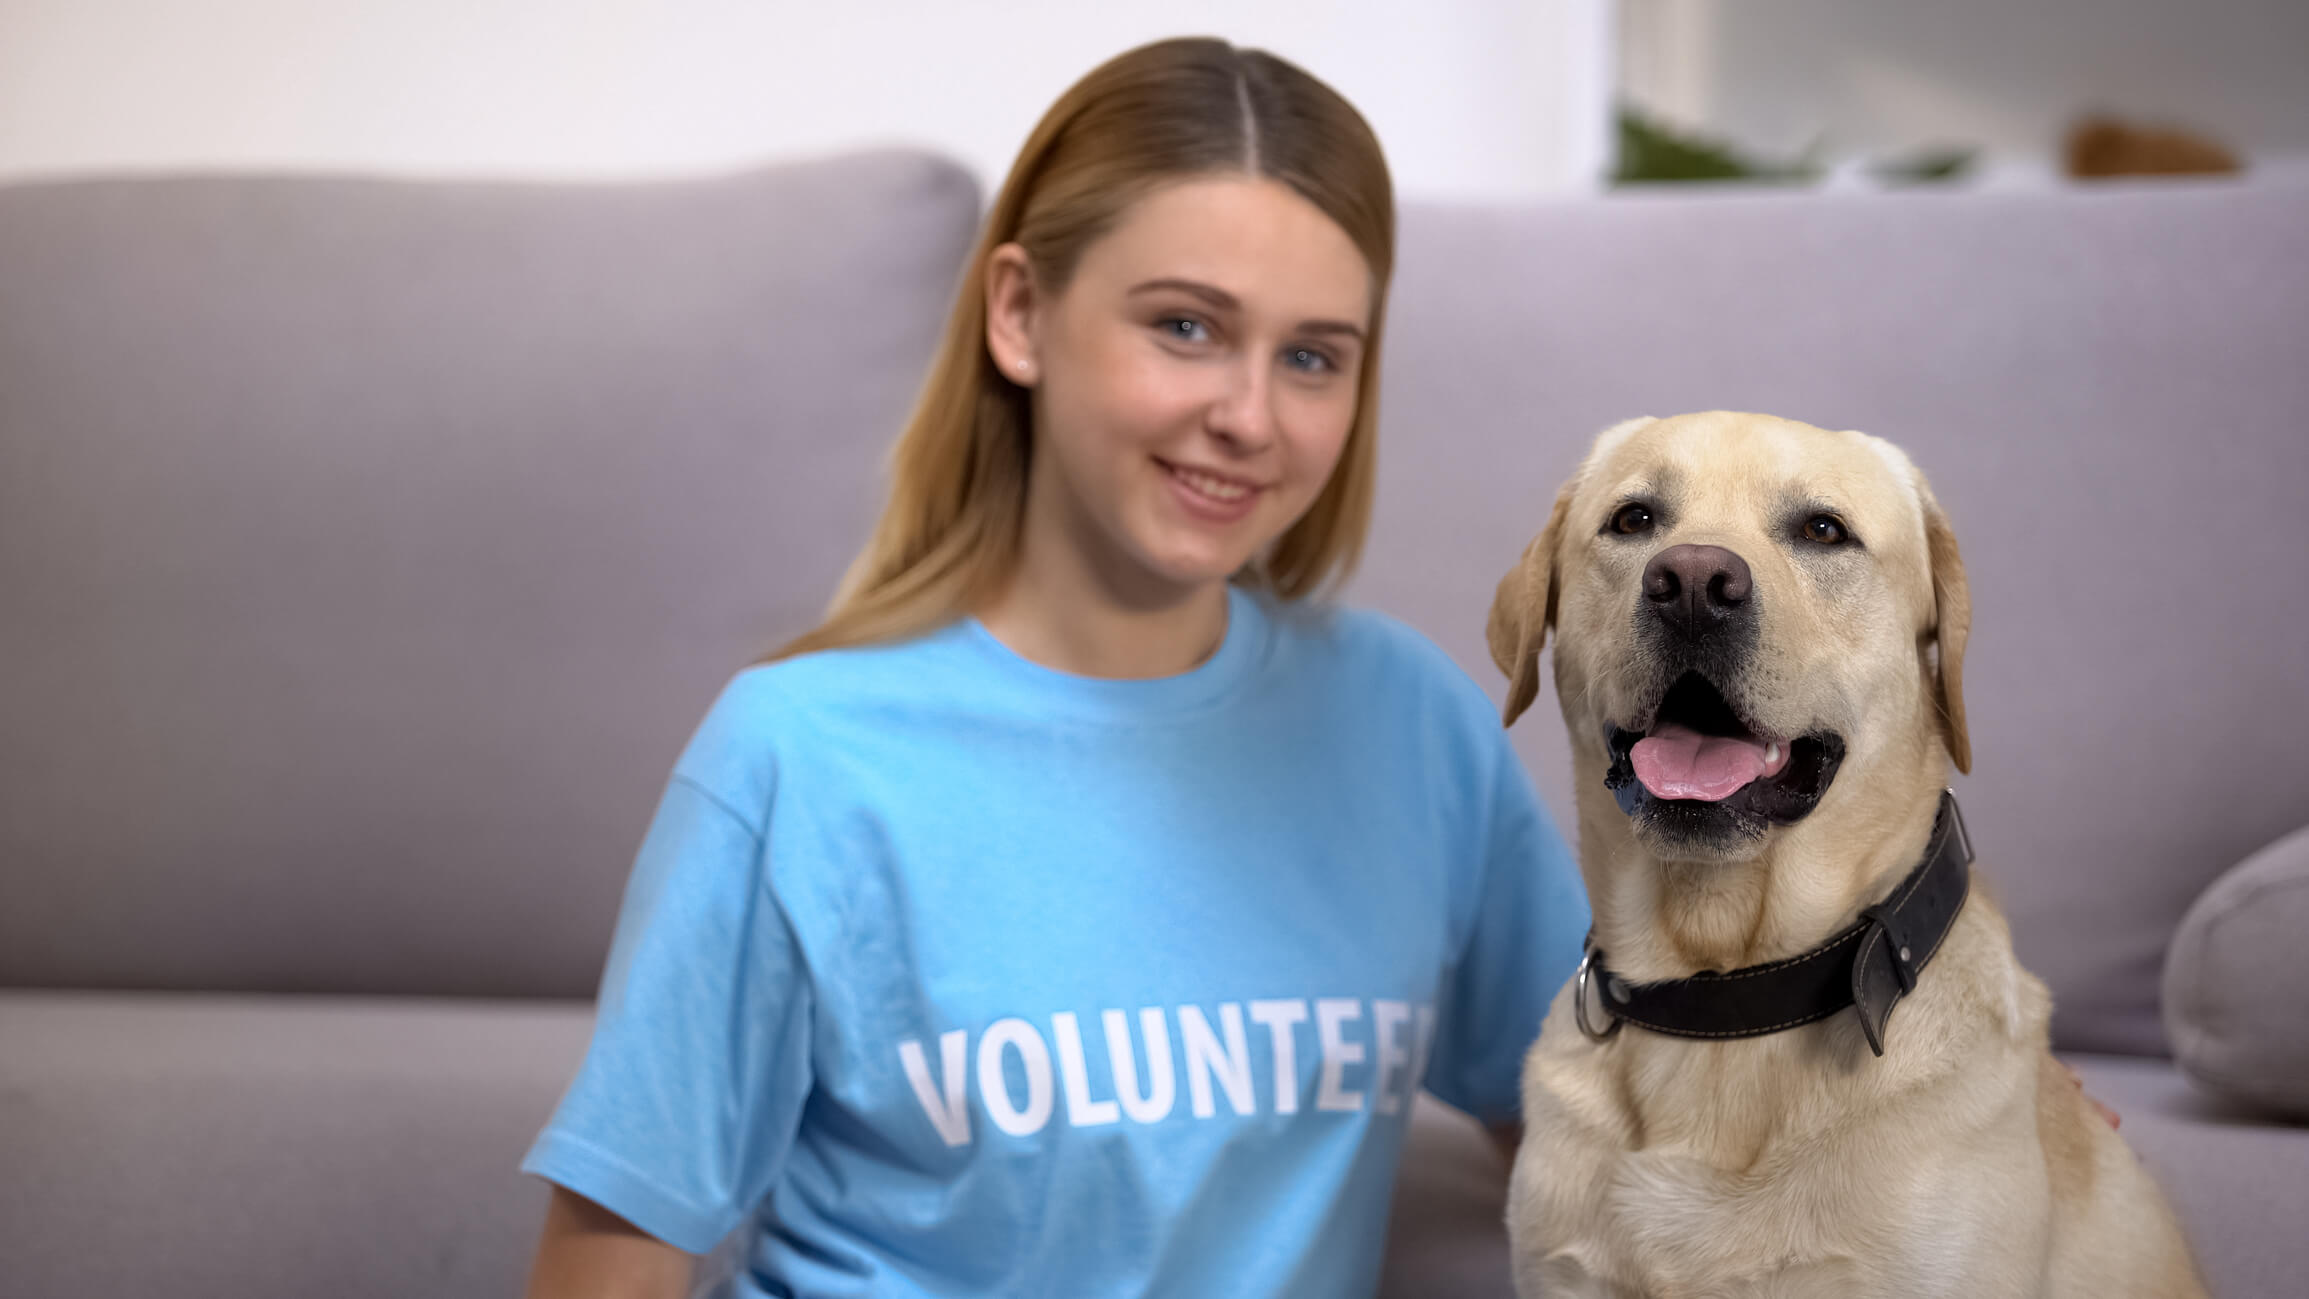 Teenage girl who is a volunteer sits next to a golden retriever